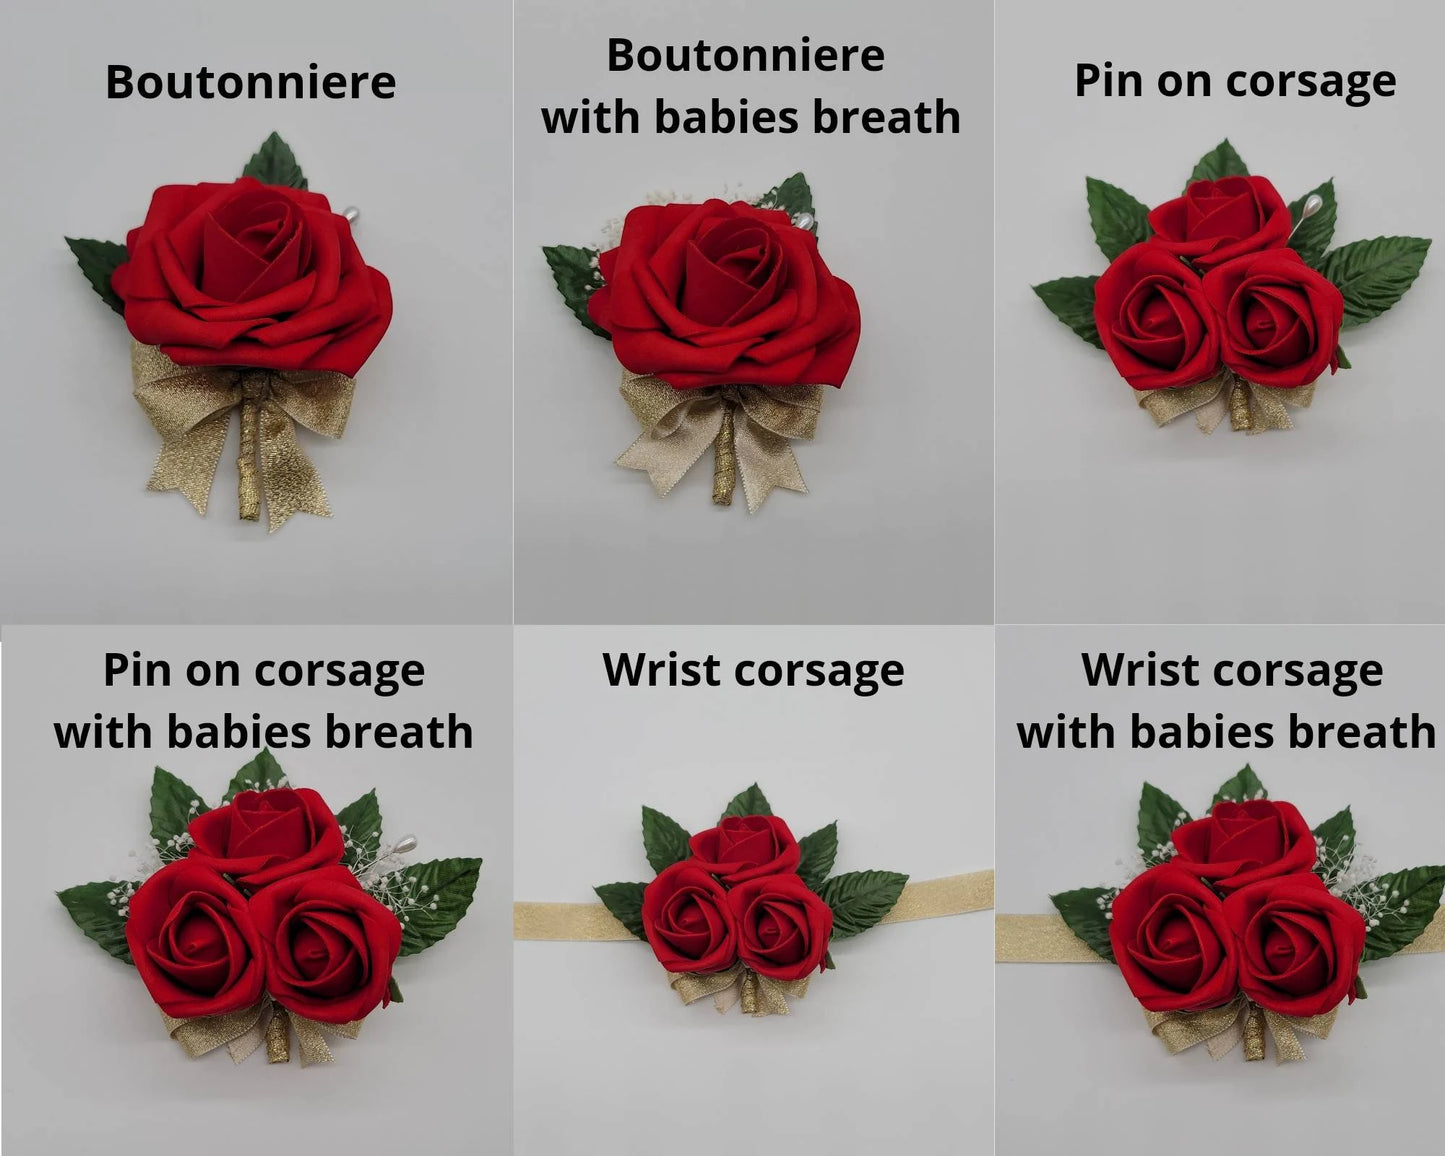 Burgundy and Gold Boutonnieres and Corsages